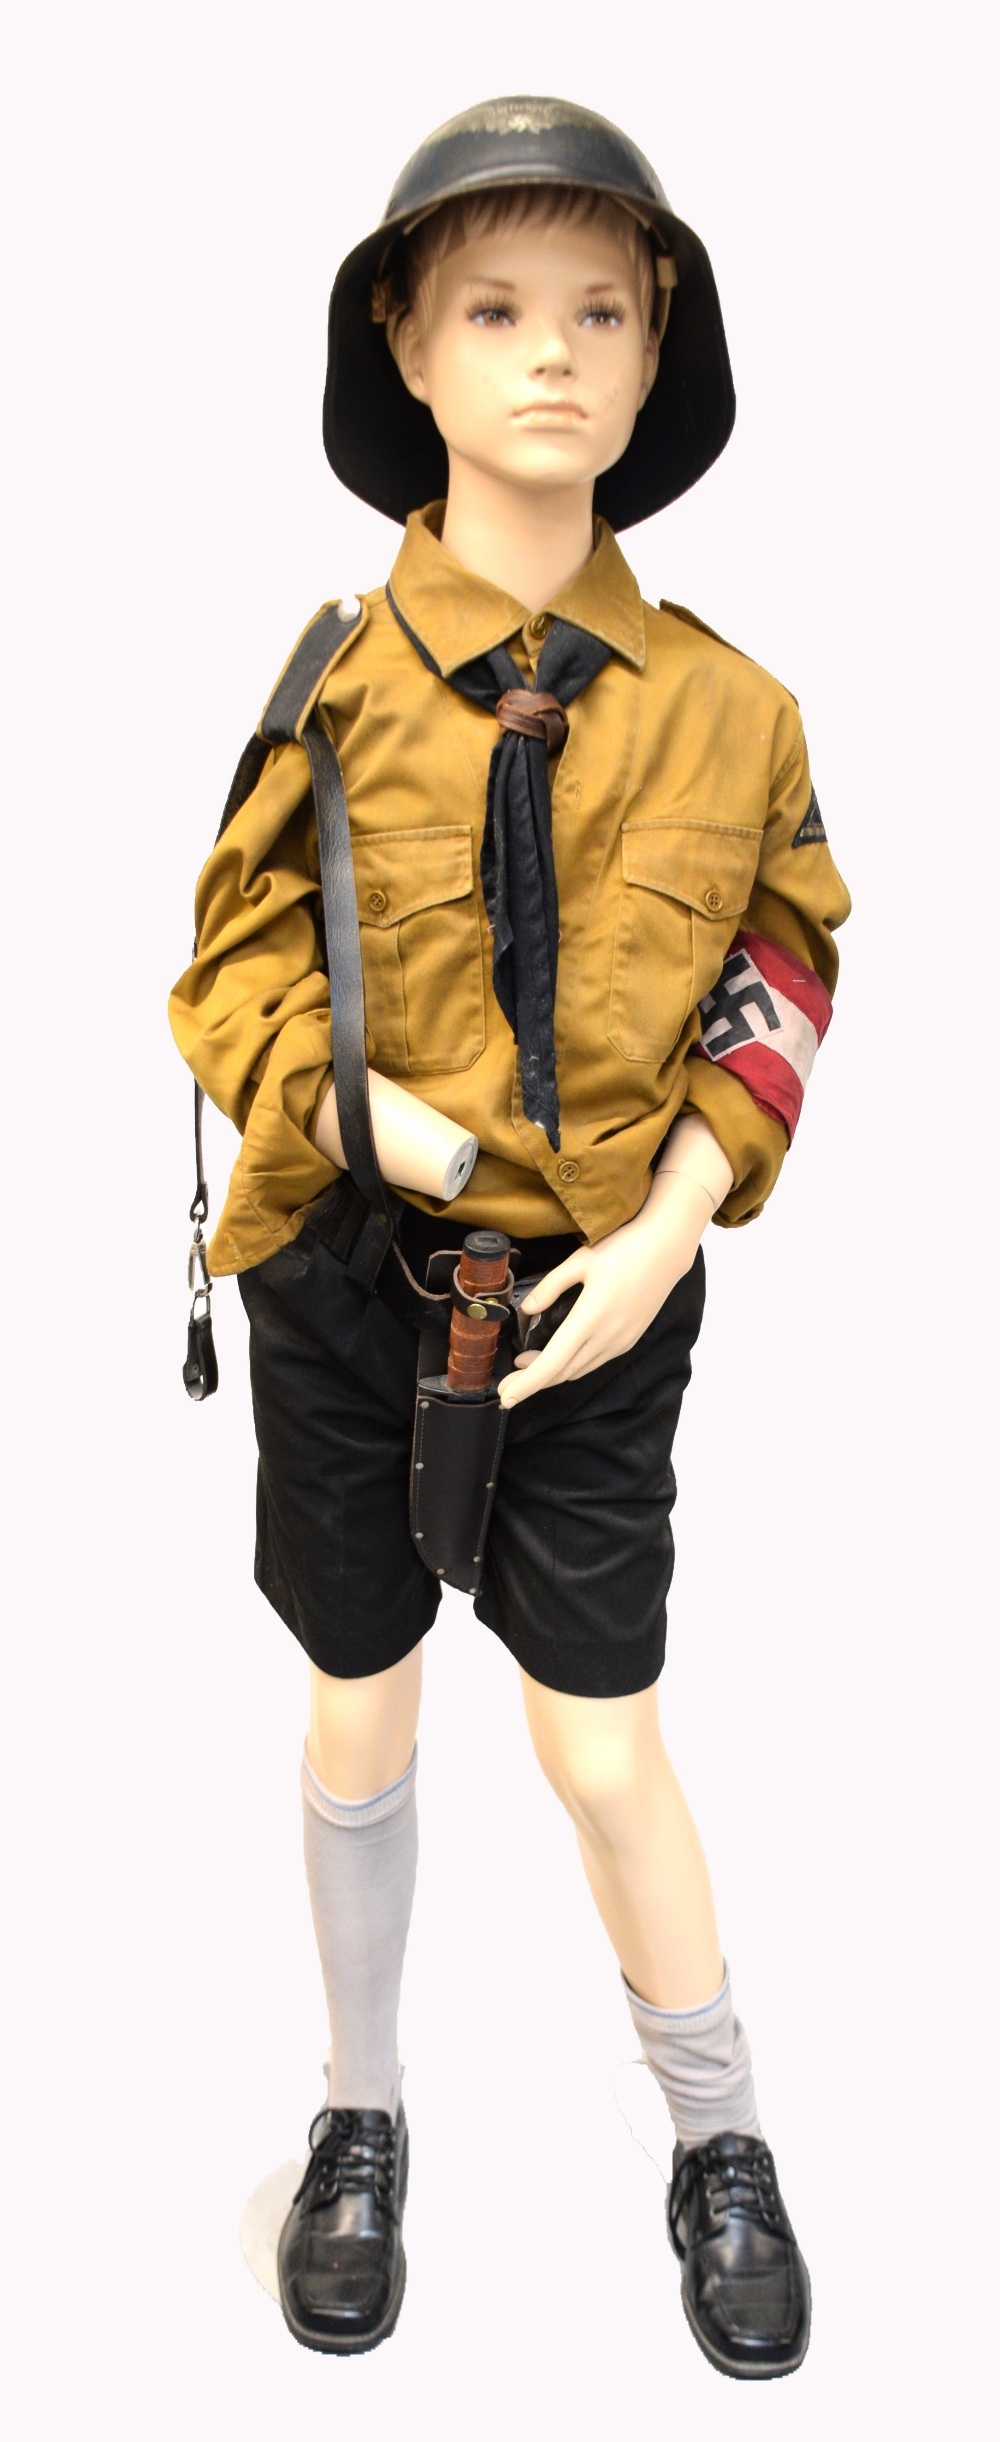 Iron Sky (2012) A boy's German school uniform costume worn in the production of the irreverent